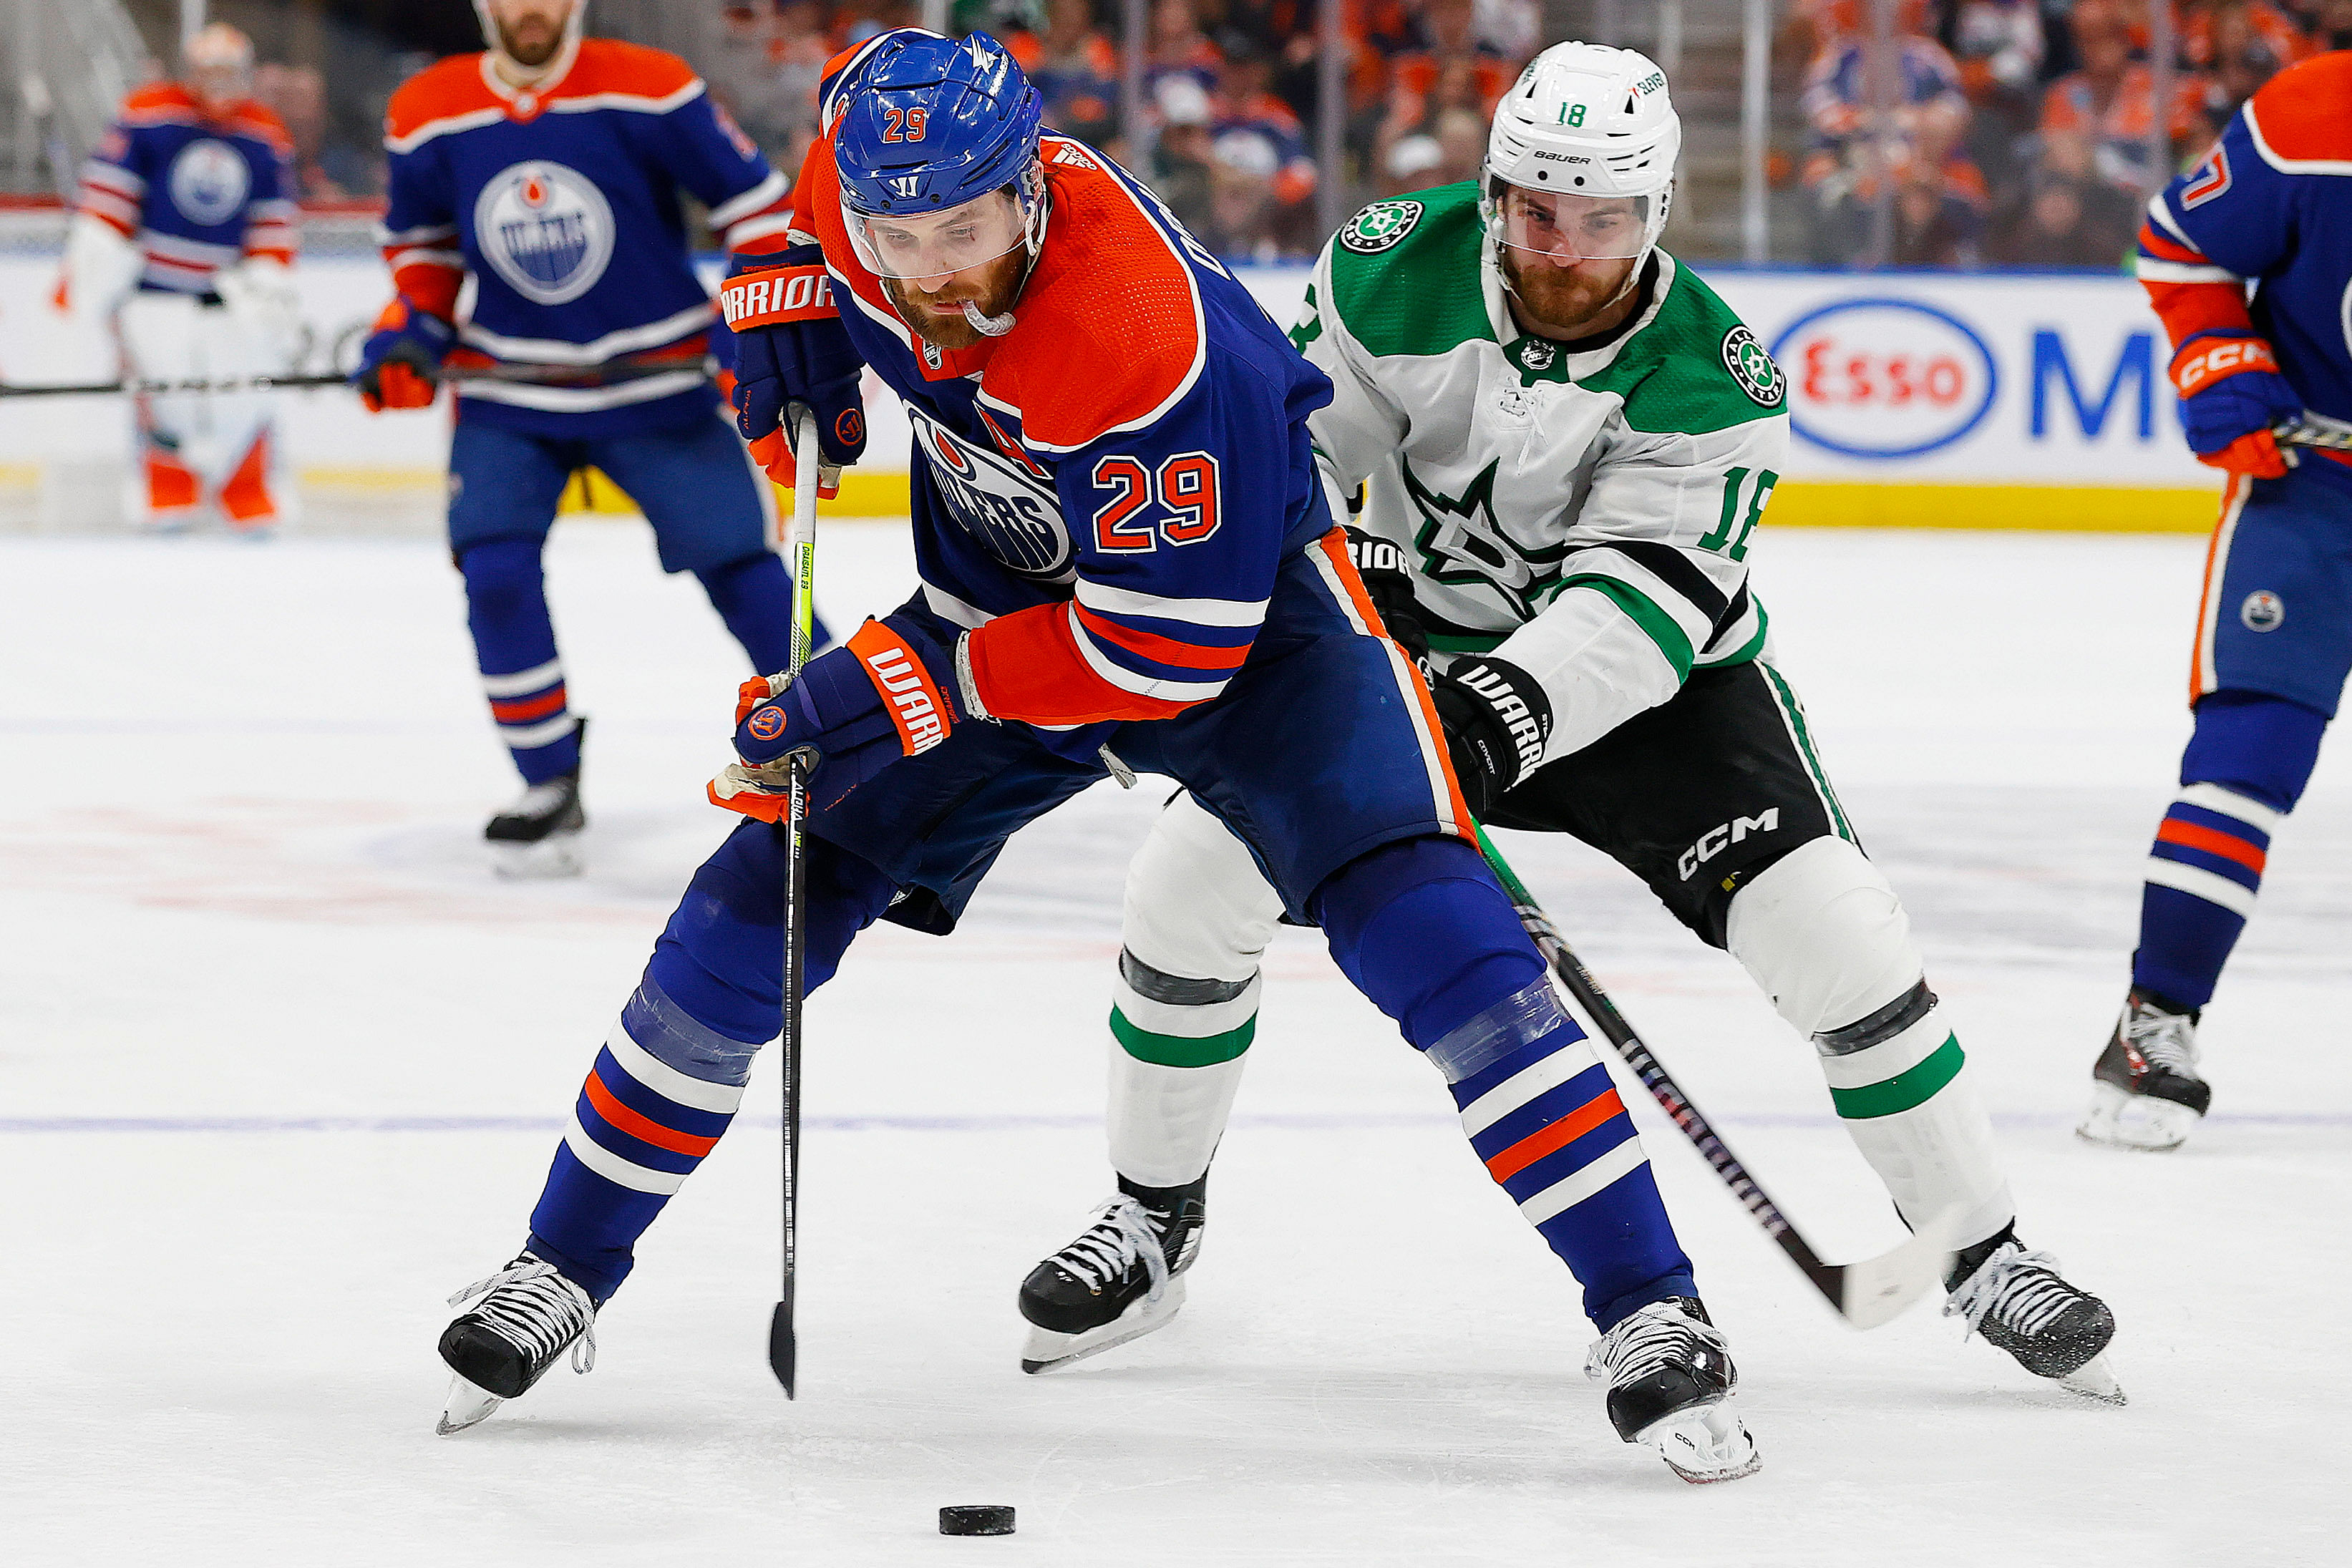 Dallas Stars vs Edmonton Oilers Live streaming options, where and how